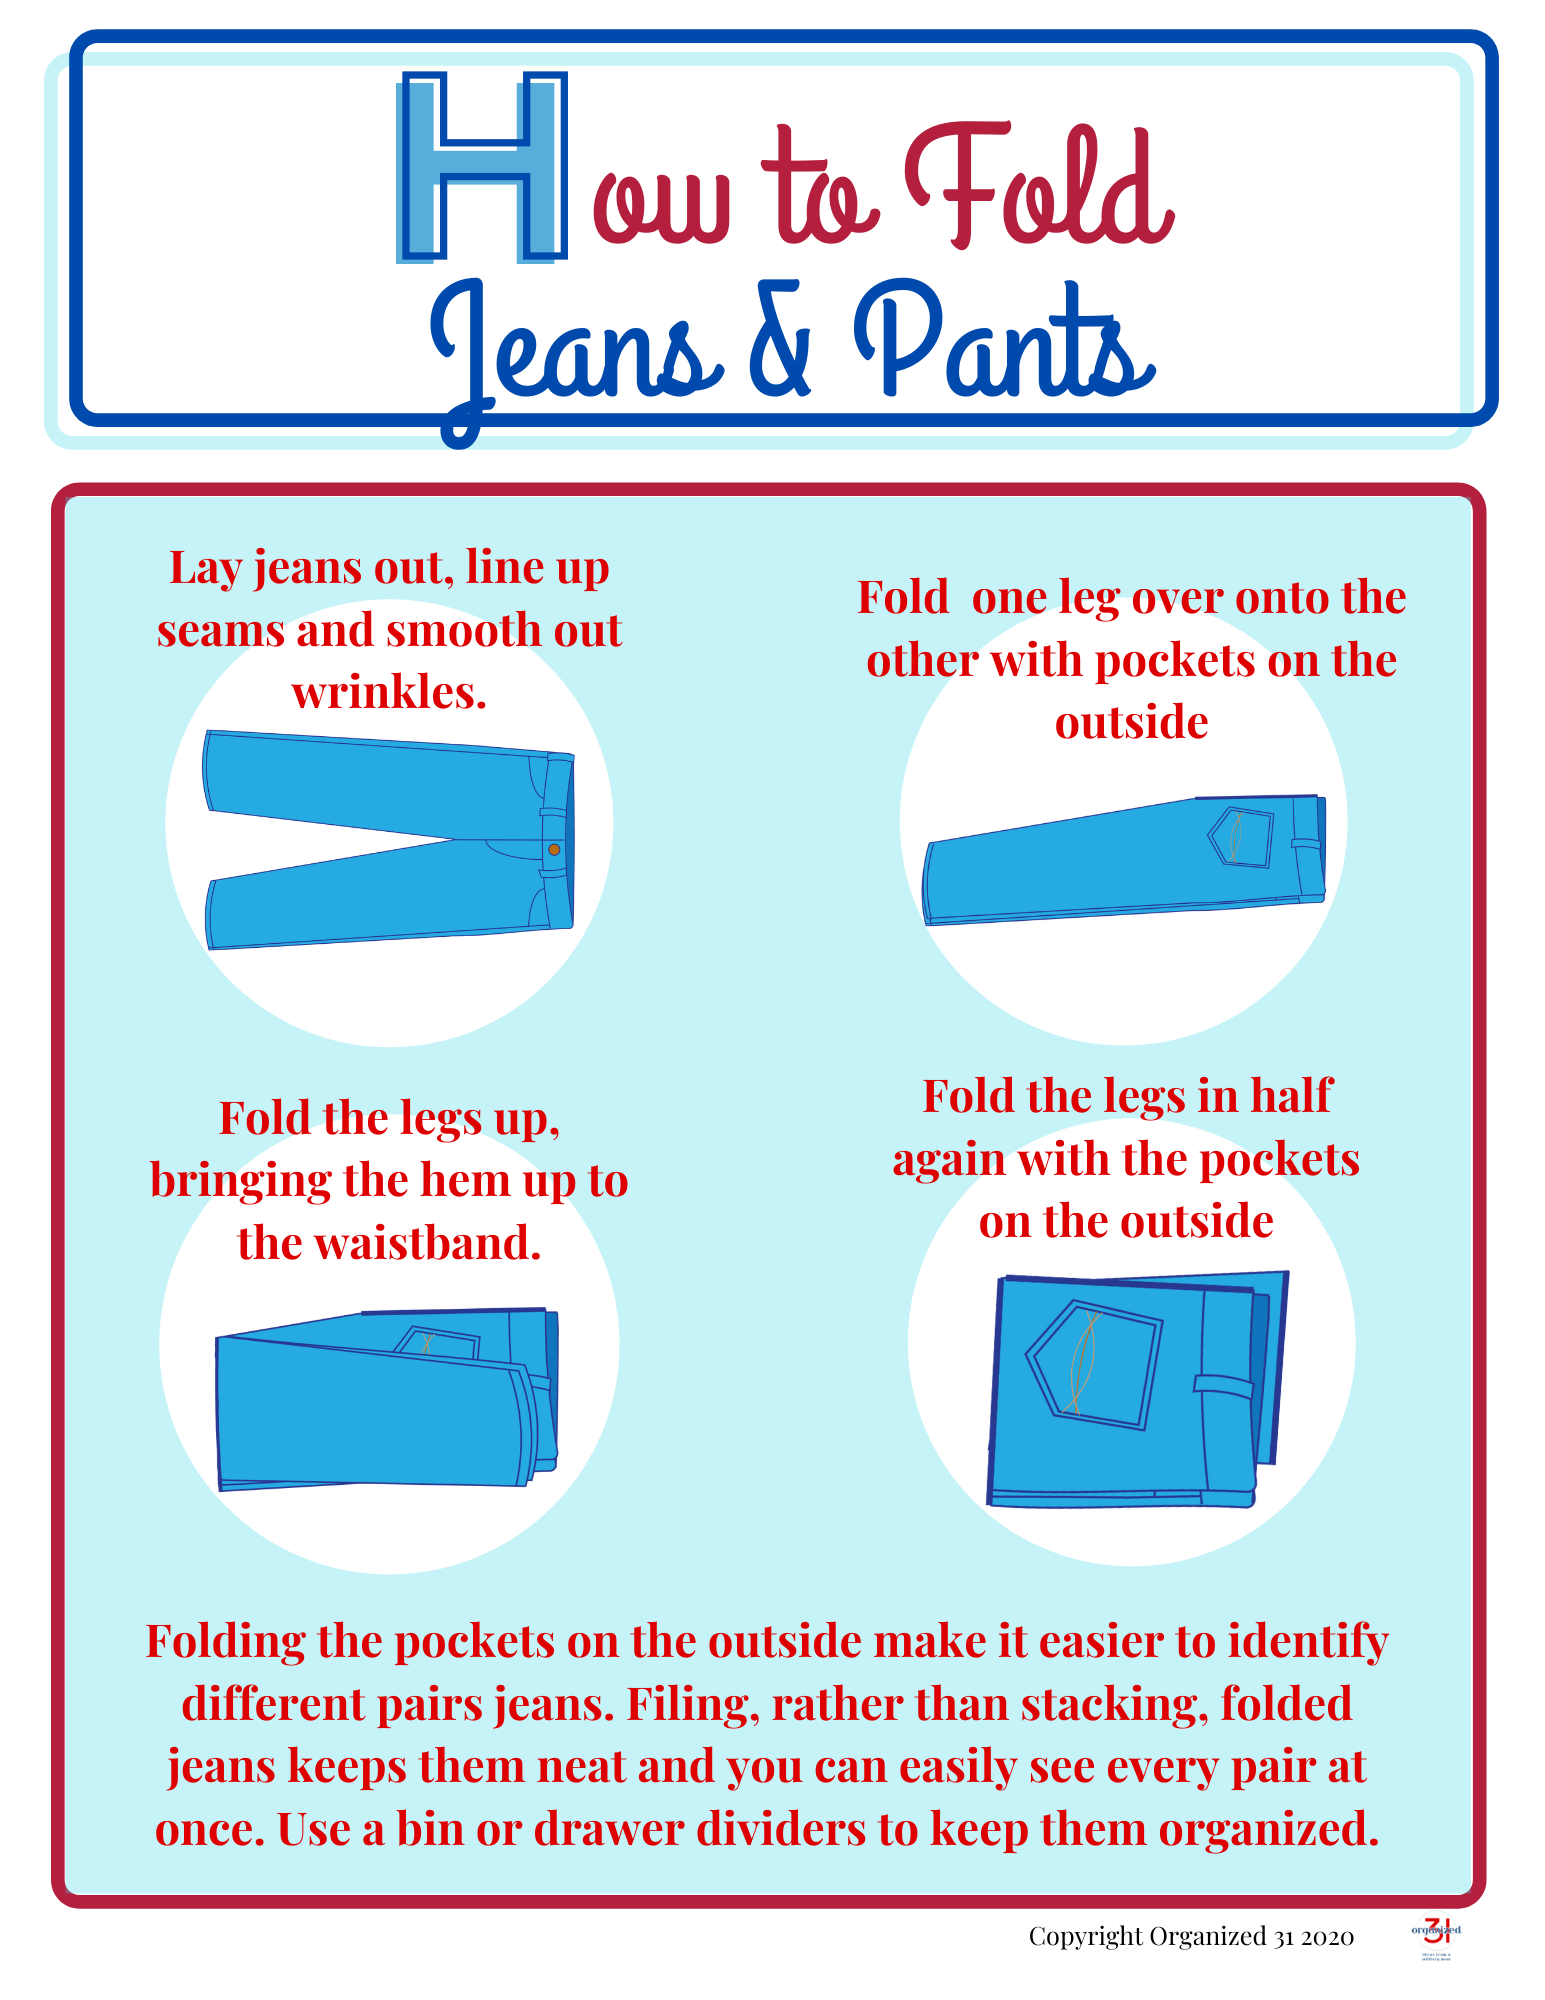 This poster, How to Fold Clothes from Organized 31 Shop, provides instructions on efficiently folding jeans and pants, ensuring clothing care while utilizing the SEO keywords "fold clothes".